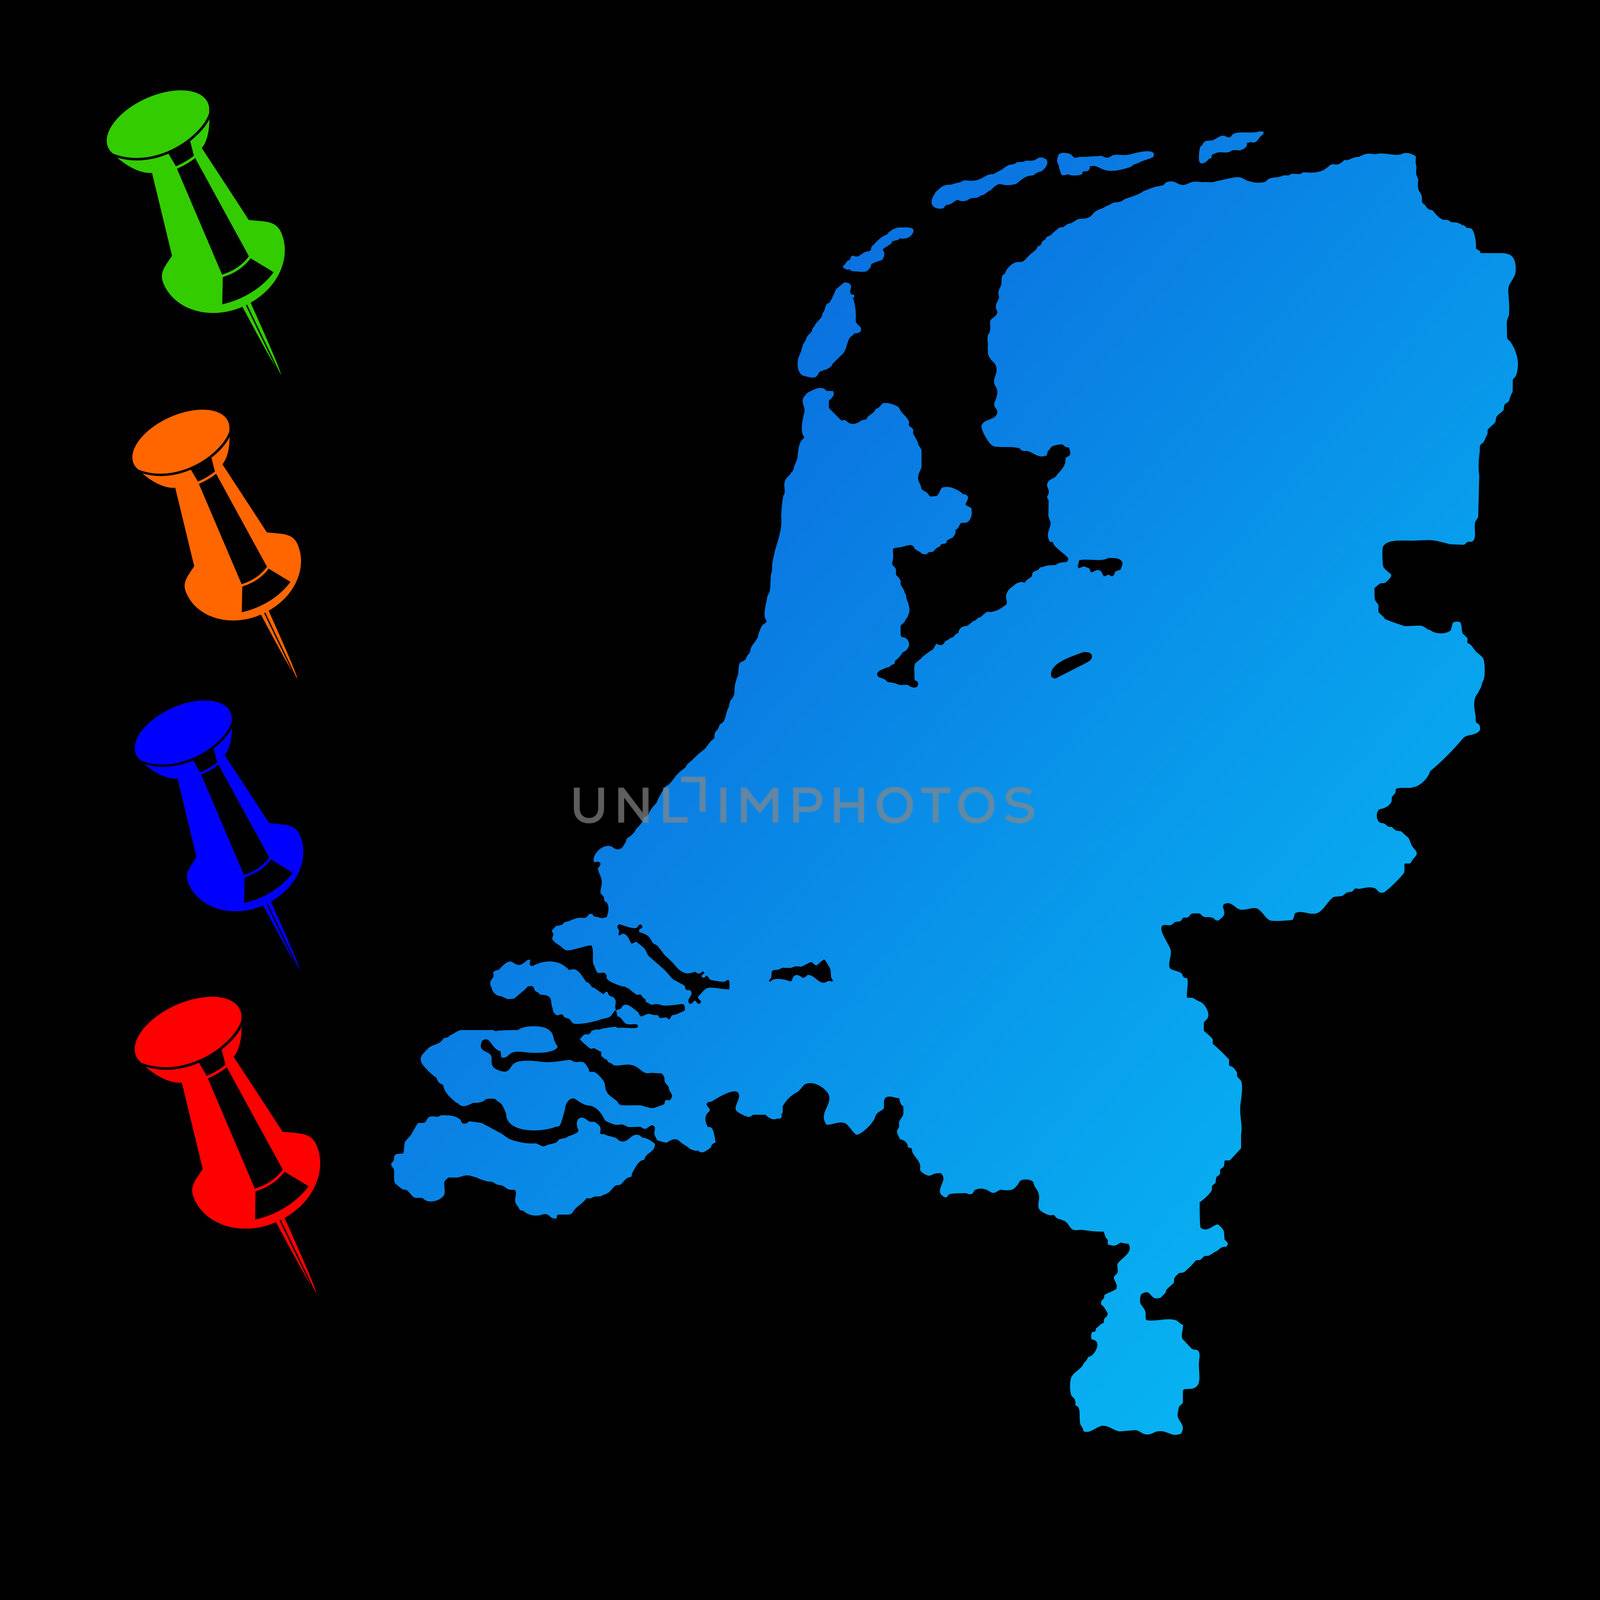 Netherlands travel map with push pins on black background.